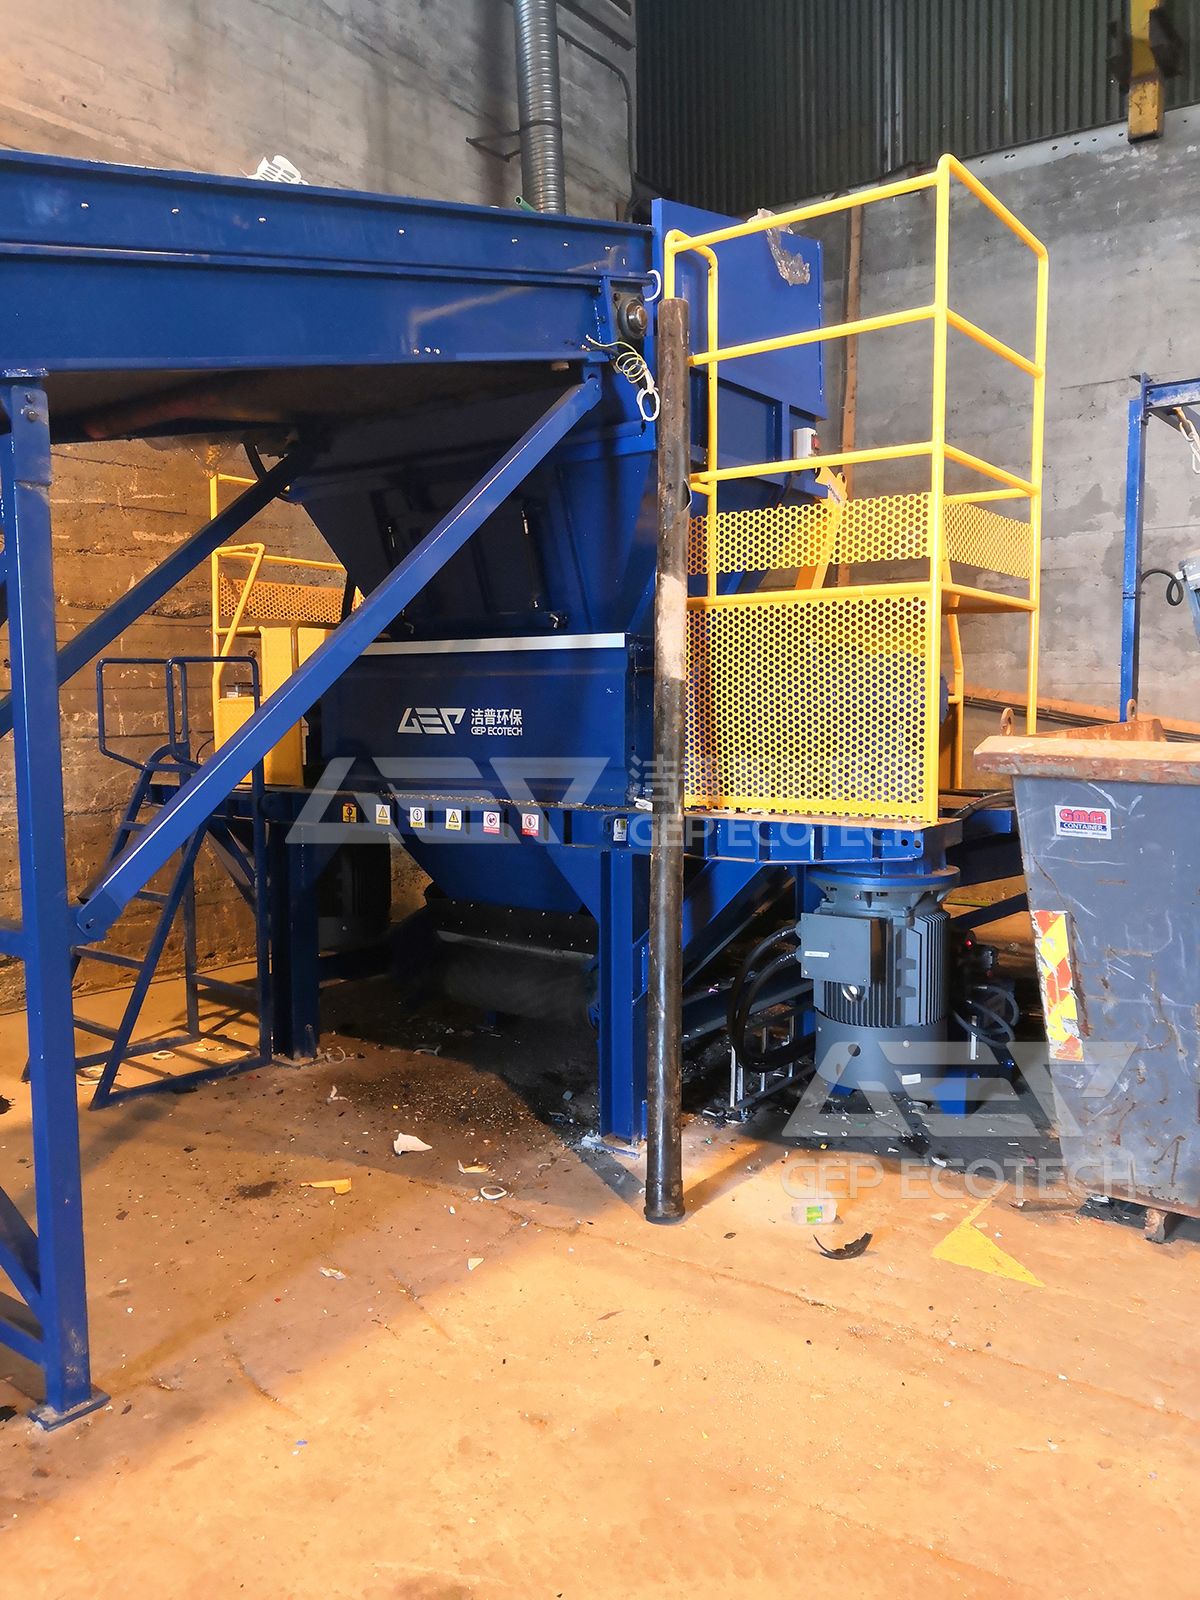 What Equipment Is Needed for the Plastic Sorting, Crushing and Cleaning Stage?